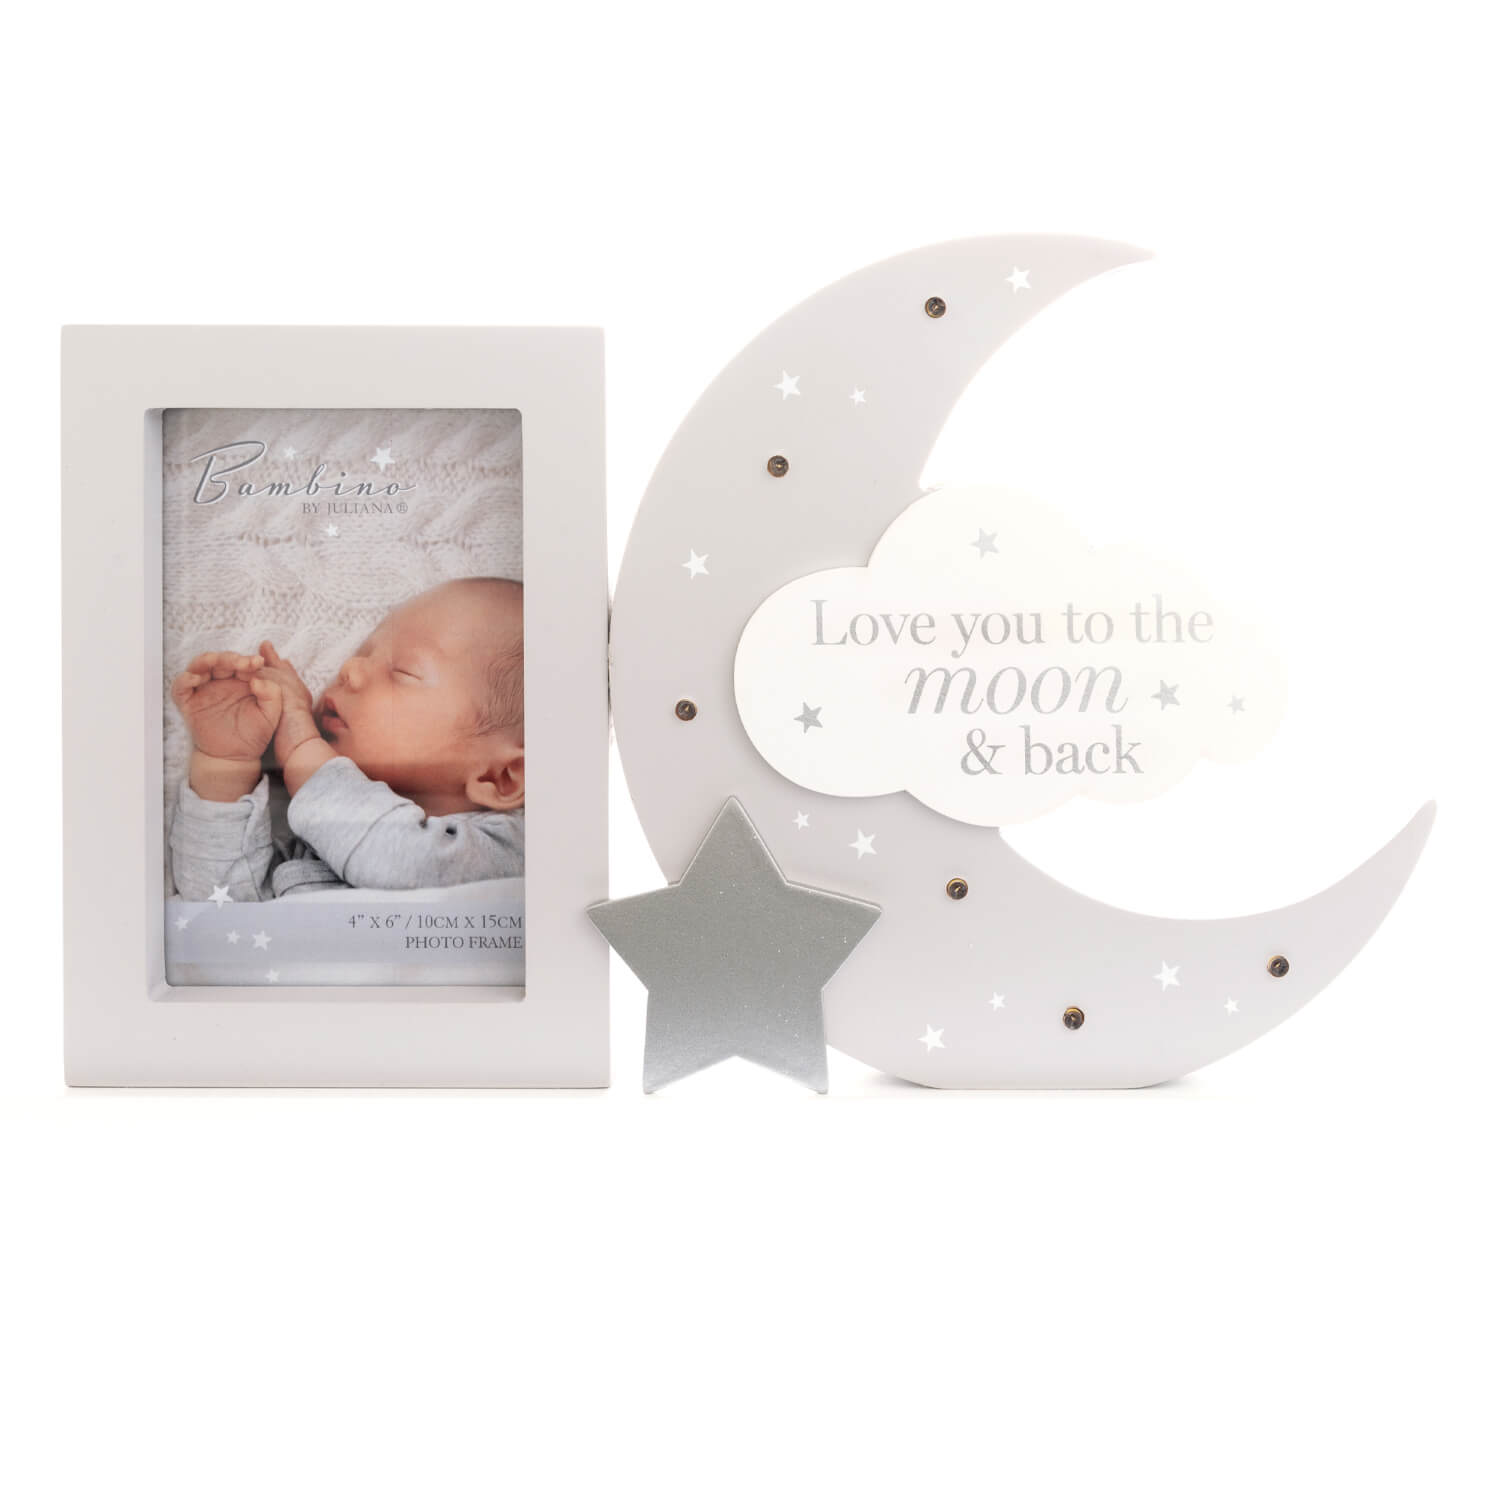 Bambino Love You To The Moon Light Up Photo Frame 1 Shaws Department Stores